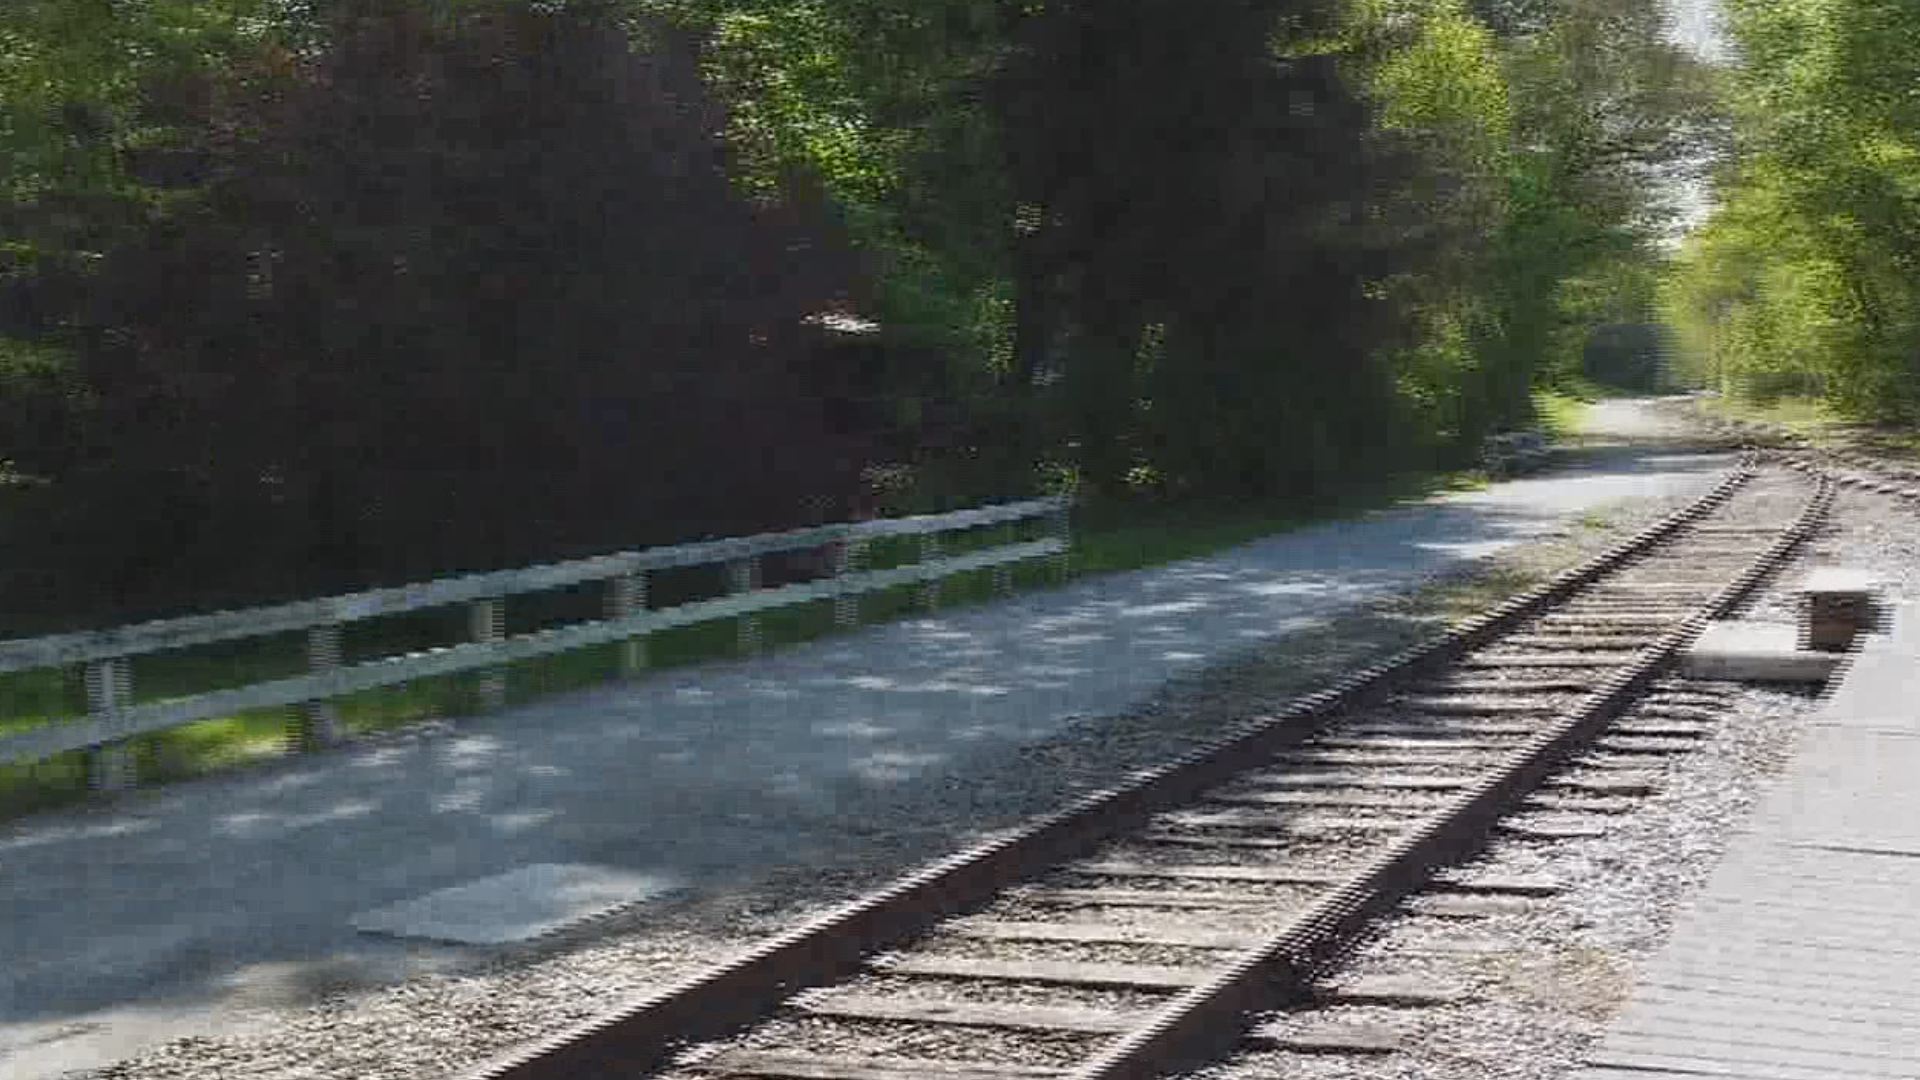 The goal of the York County Rail Trail Authority is to raise $15,000 during the give event.